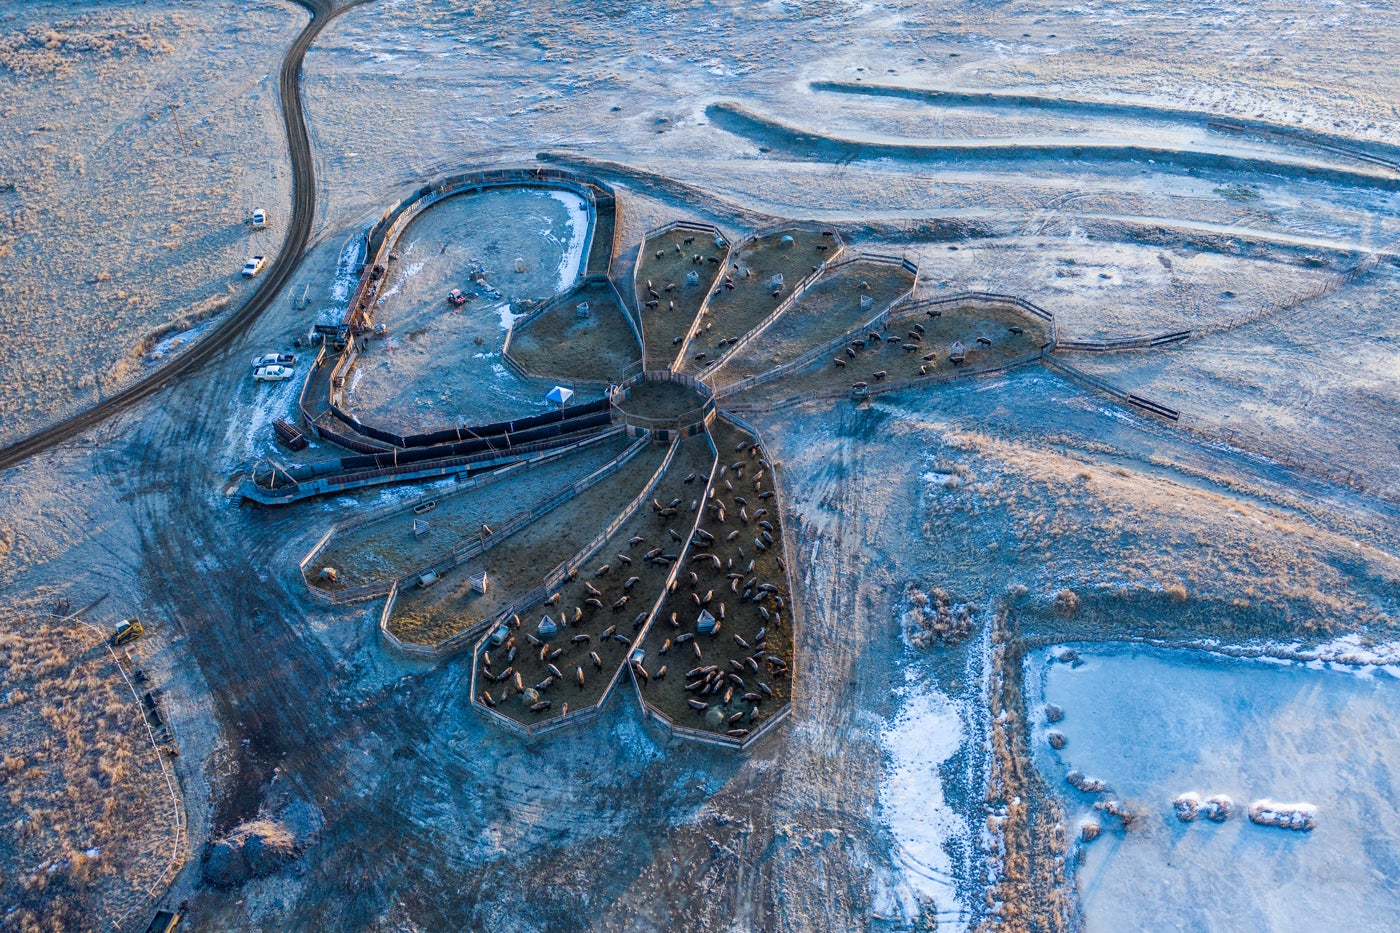 An aerial perspective of the bison enclosure. The lower portion resembles a flower, with each "petal" forming a separate corral. The chute in the upper portion resembles a racetrack.